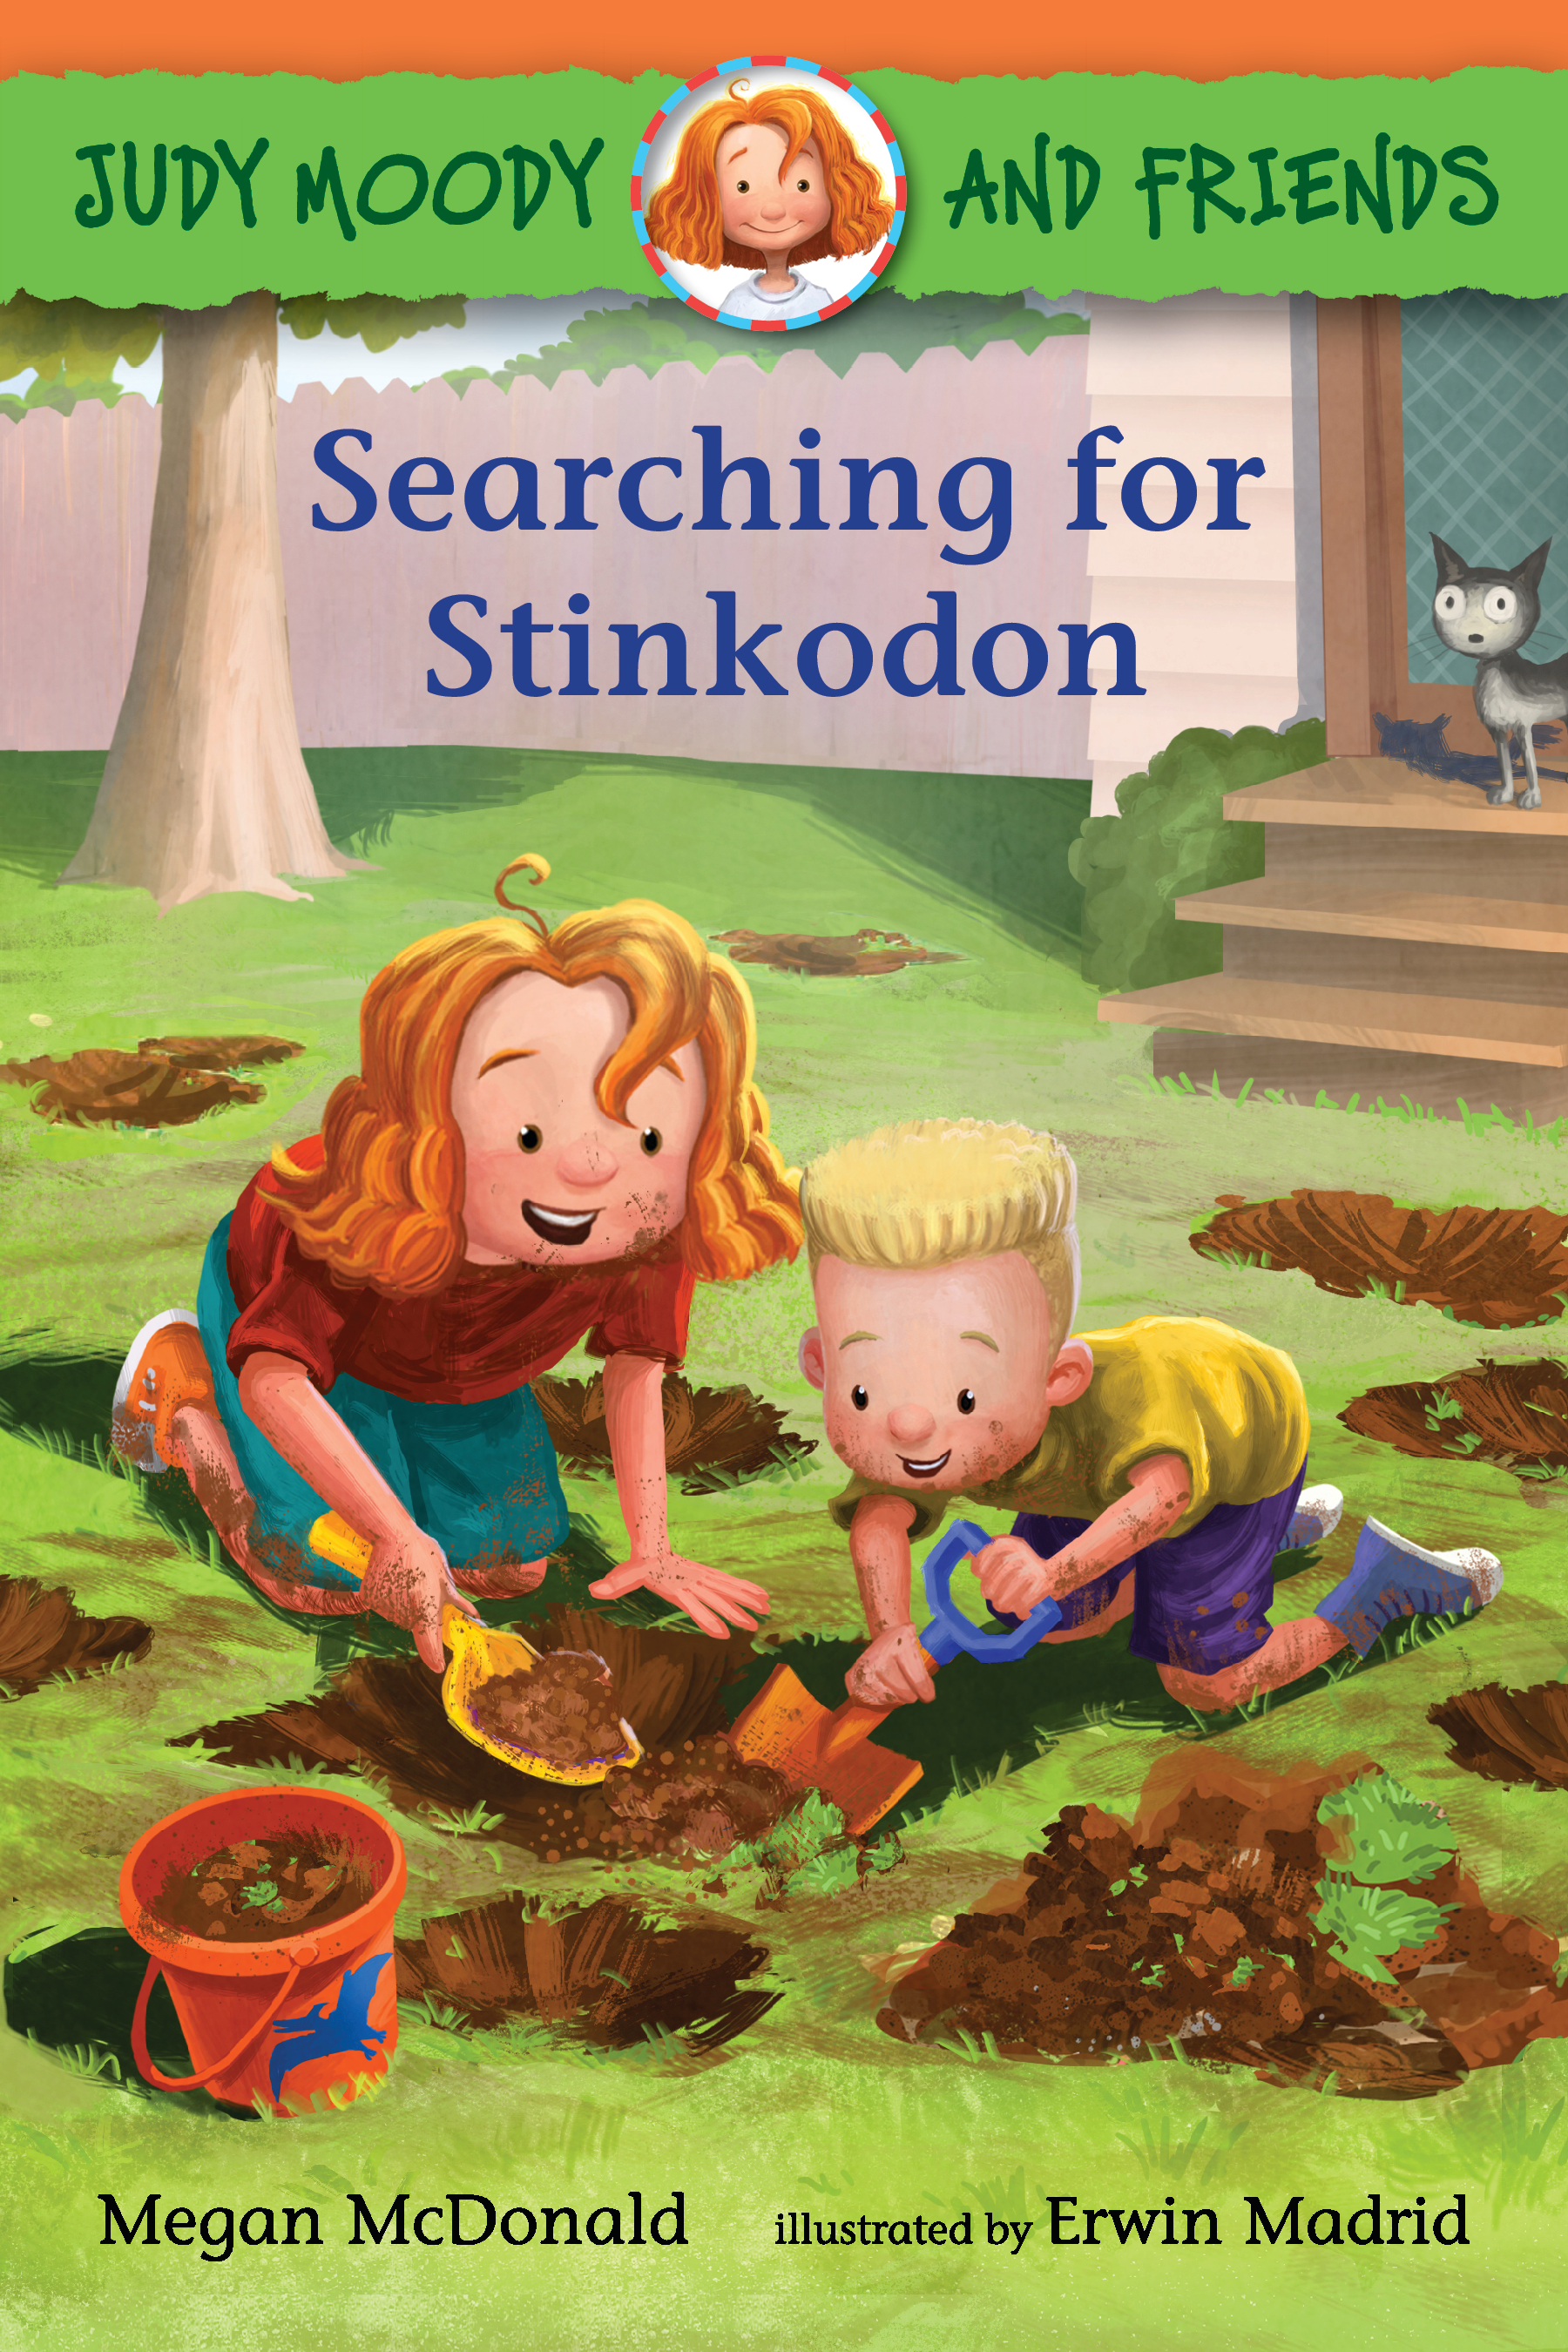 Judy-Moody-and-Friends-Searching-for-Stinkodon